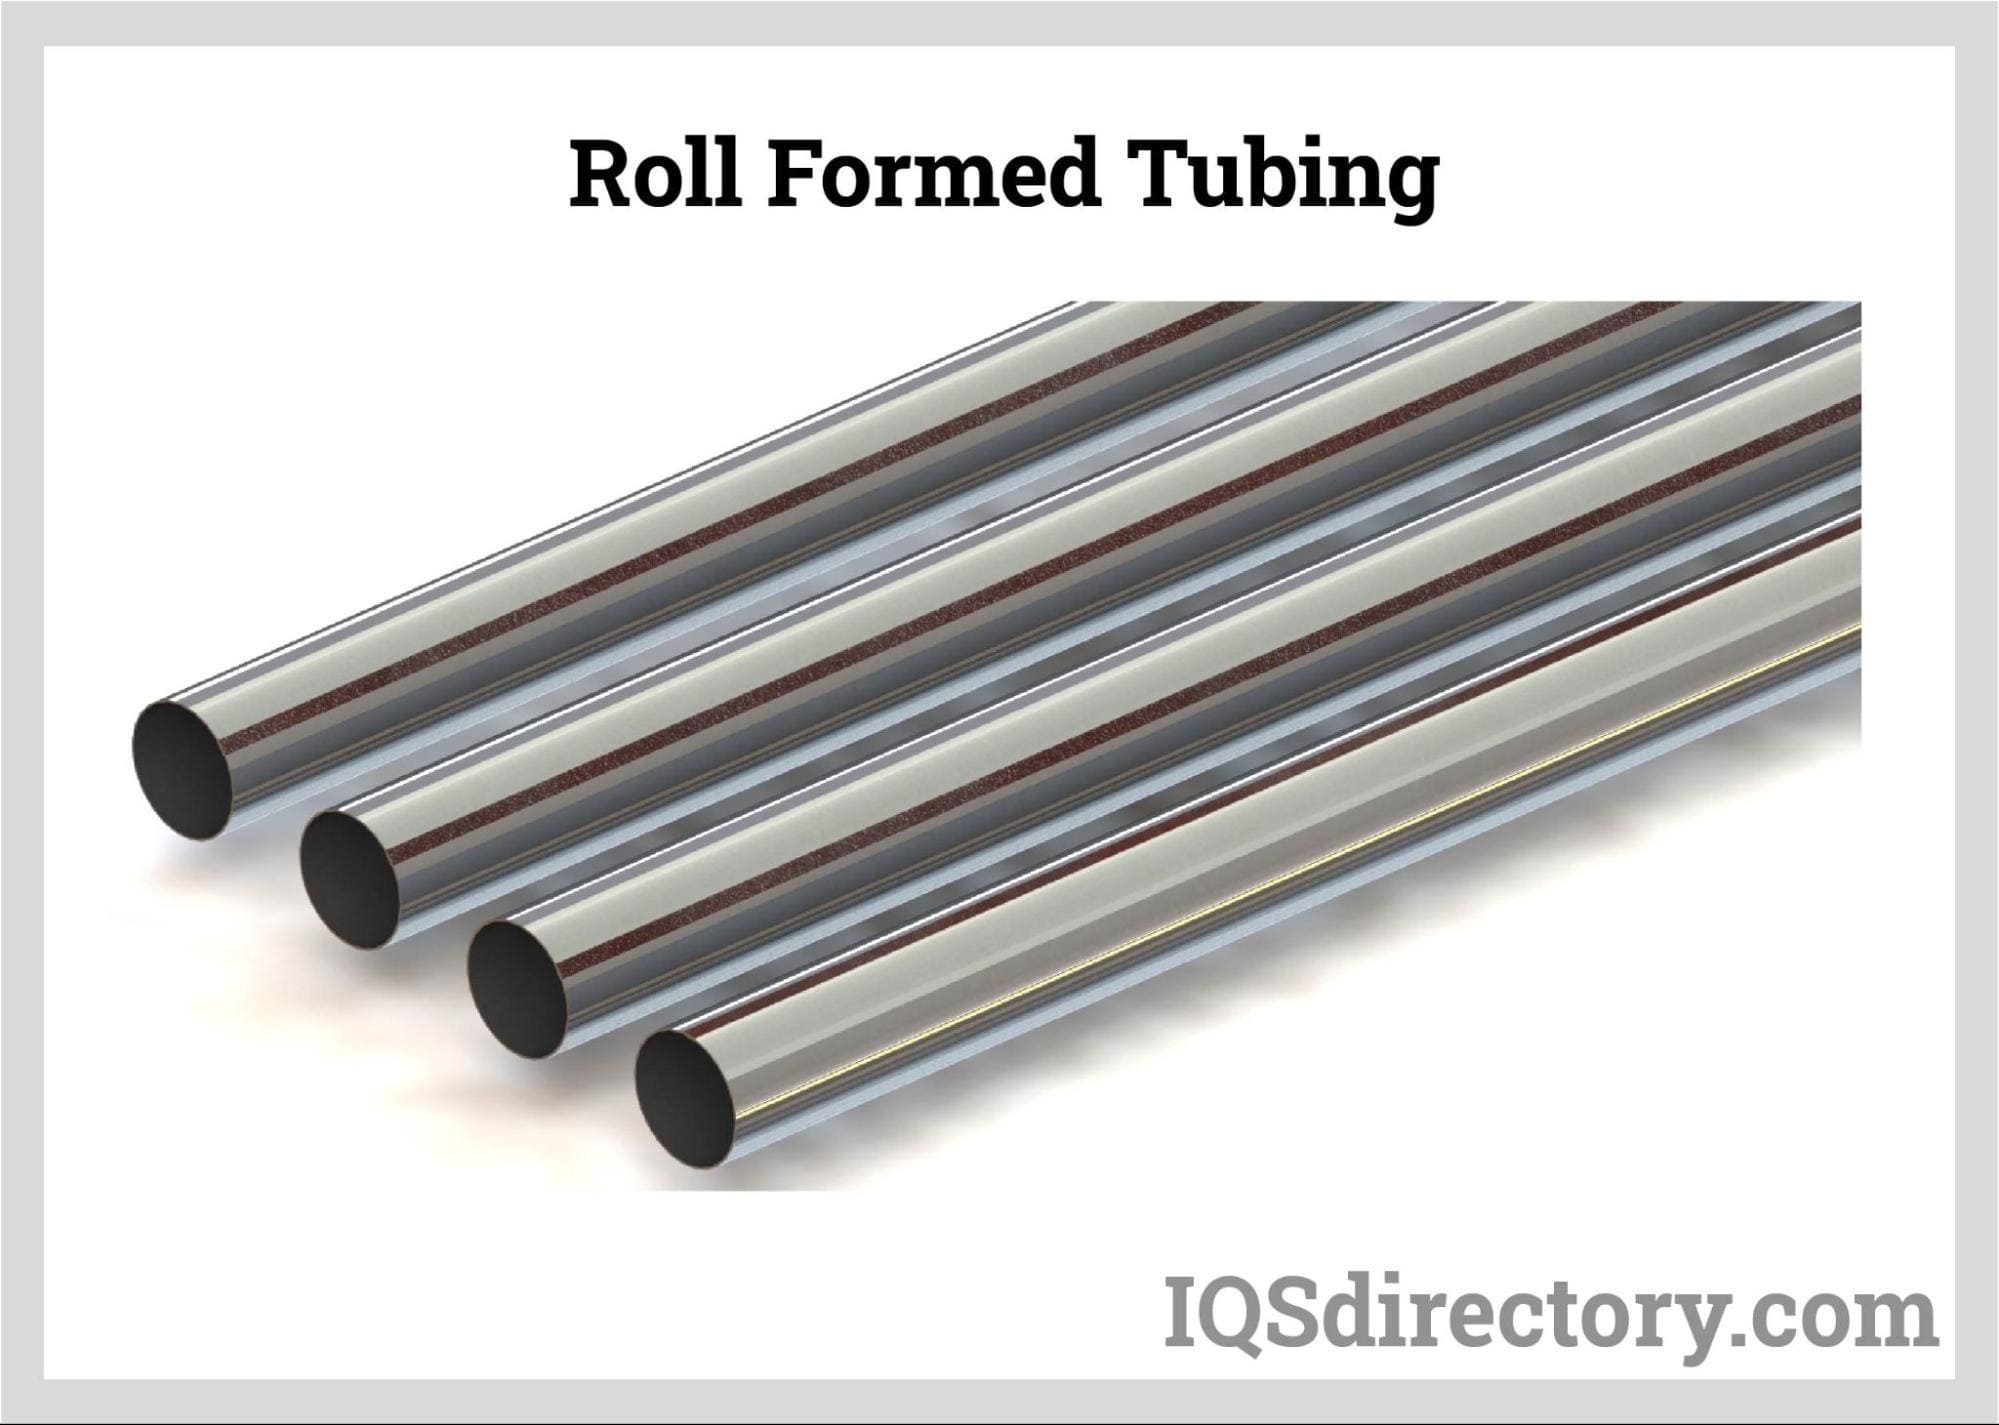 Roll Formed Tubing